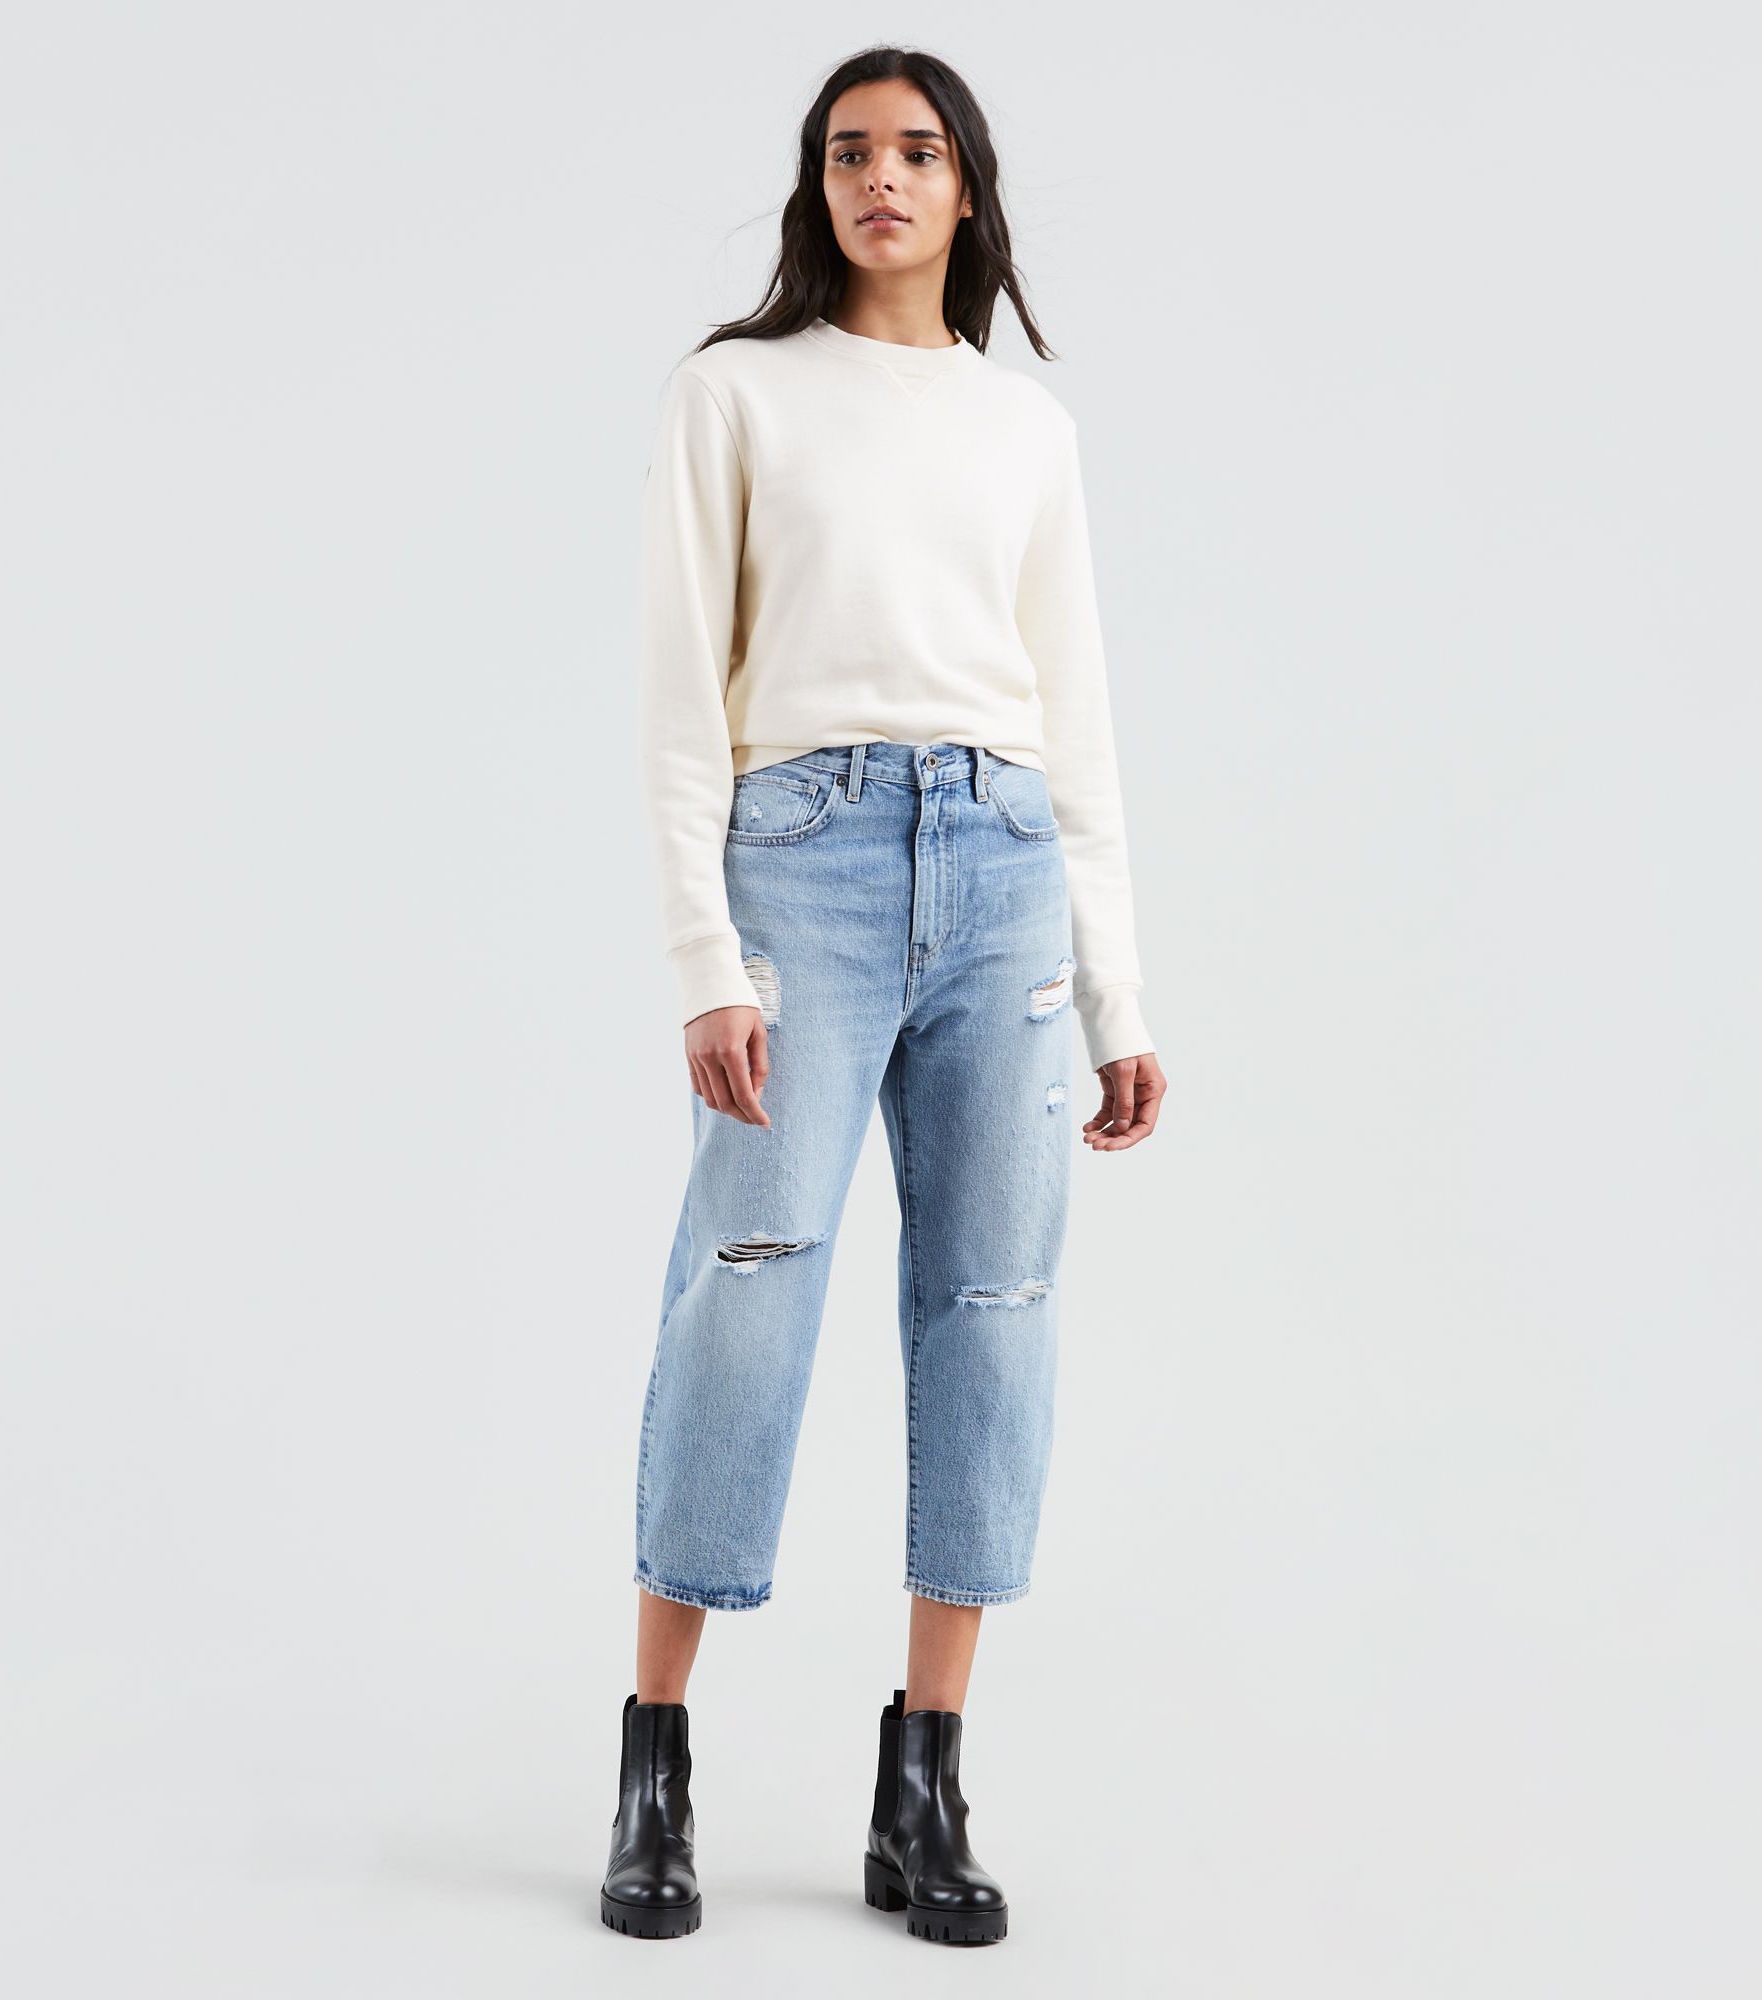 The 8 Best Levi’s Jeans For Summer - THE JEANS BLOG